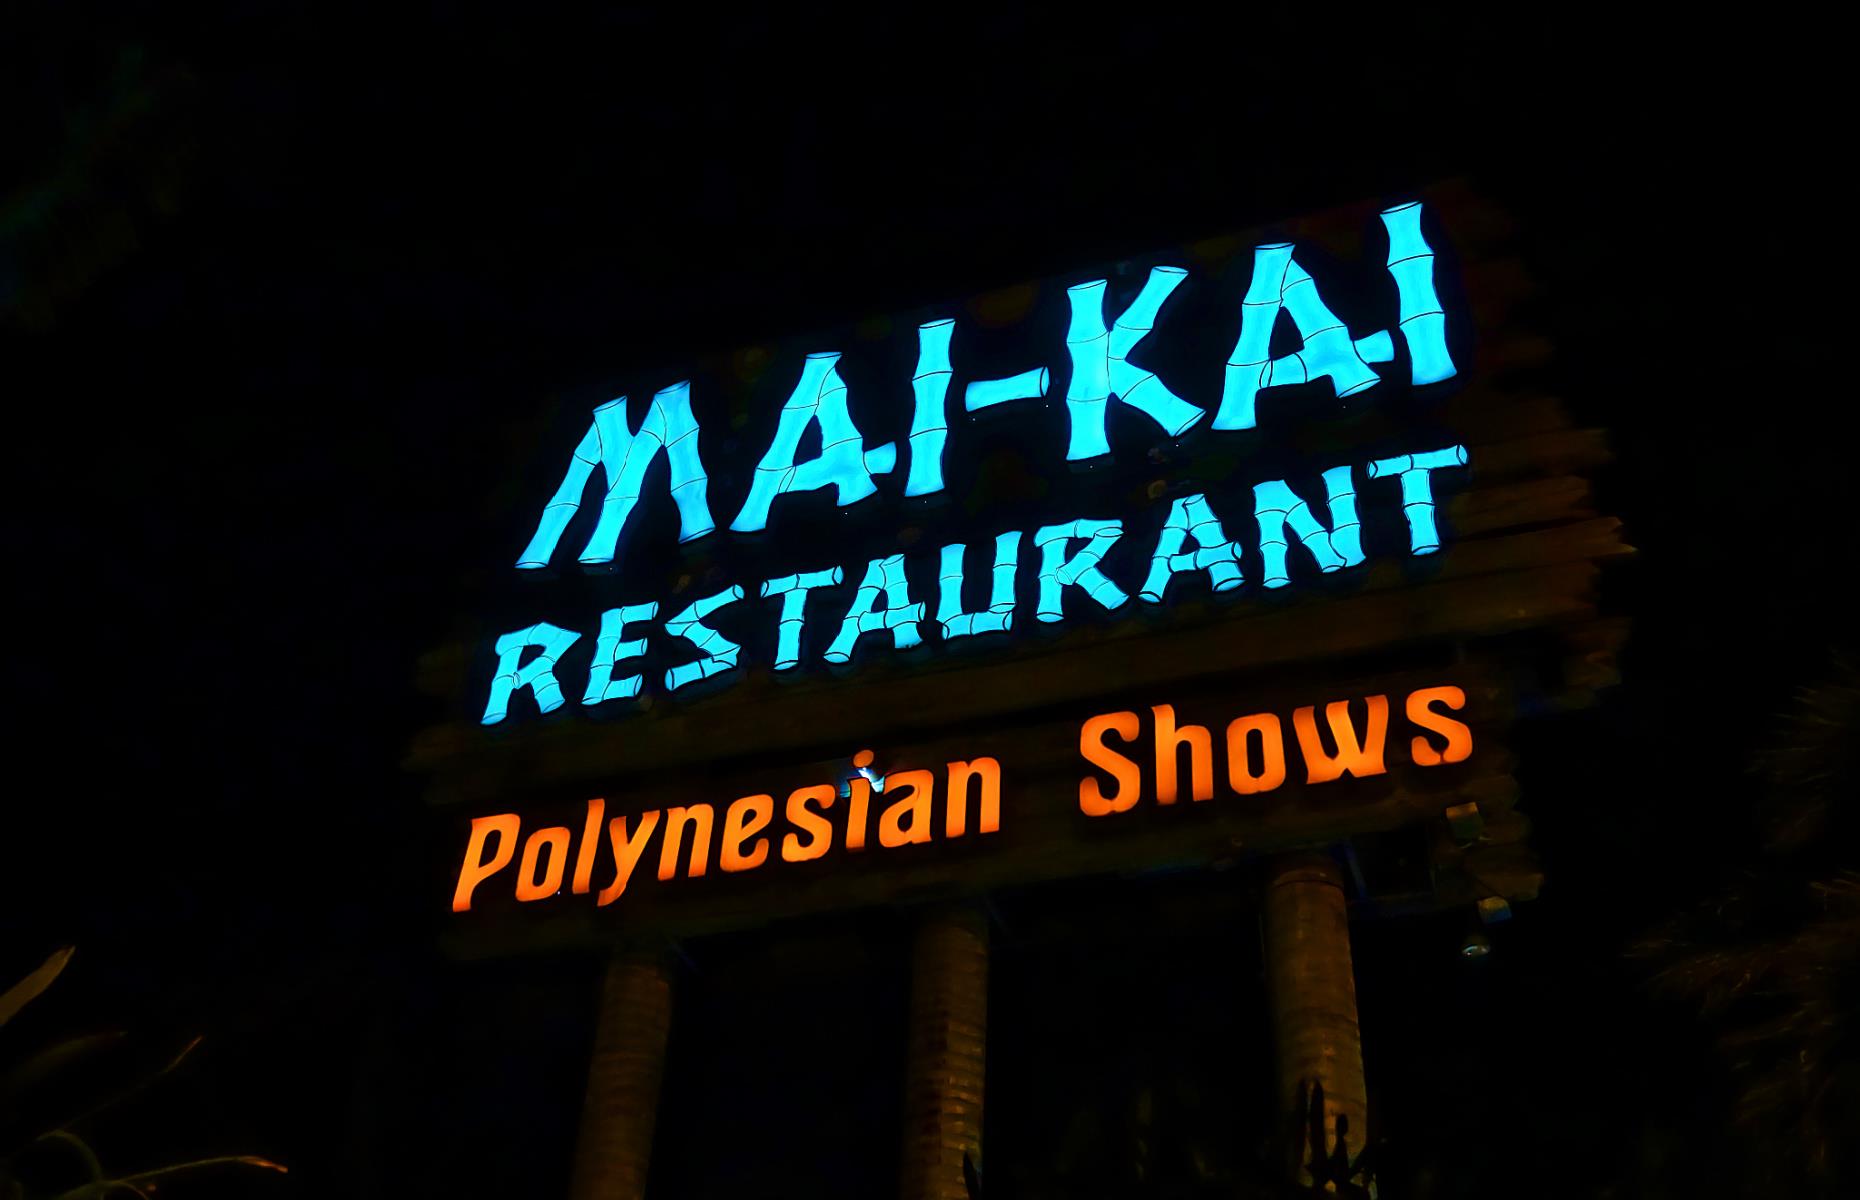 <p>A classic tiki-style restaurant, this business near Fort Lauderdale opened in 1956 and is one of the last mid-century Polynesian-themed establishments in America. Tourists and locals flocked to the <a href="https://www.maikai.com">Mai-Kai</a> because of its kitschy decor, tropical-inspired food and Polynesian floor shows. The restaurant is currently closed due to repair damage from a burst pipe, but the family that has owned it since the 1950s hopes to get it back up and running soon.</p>